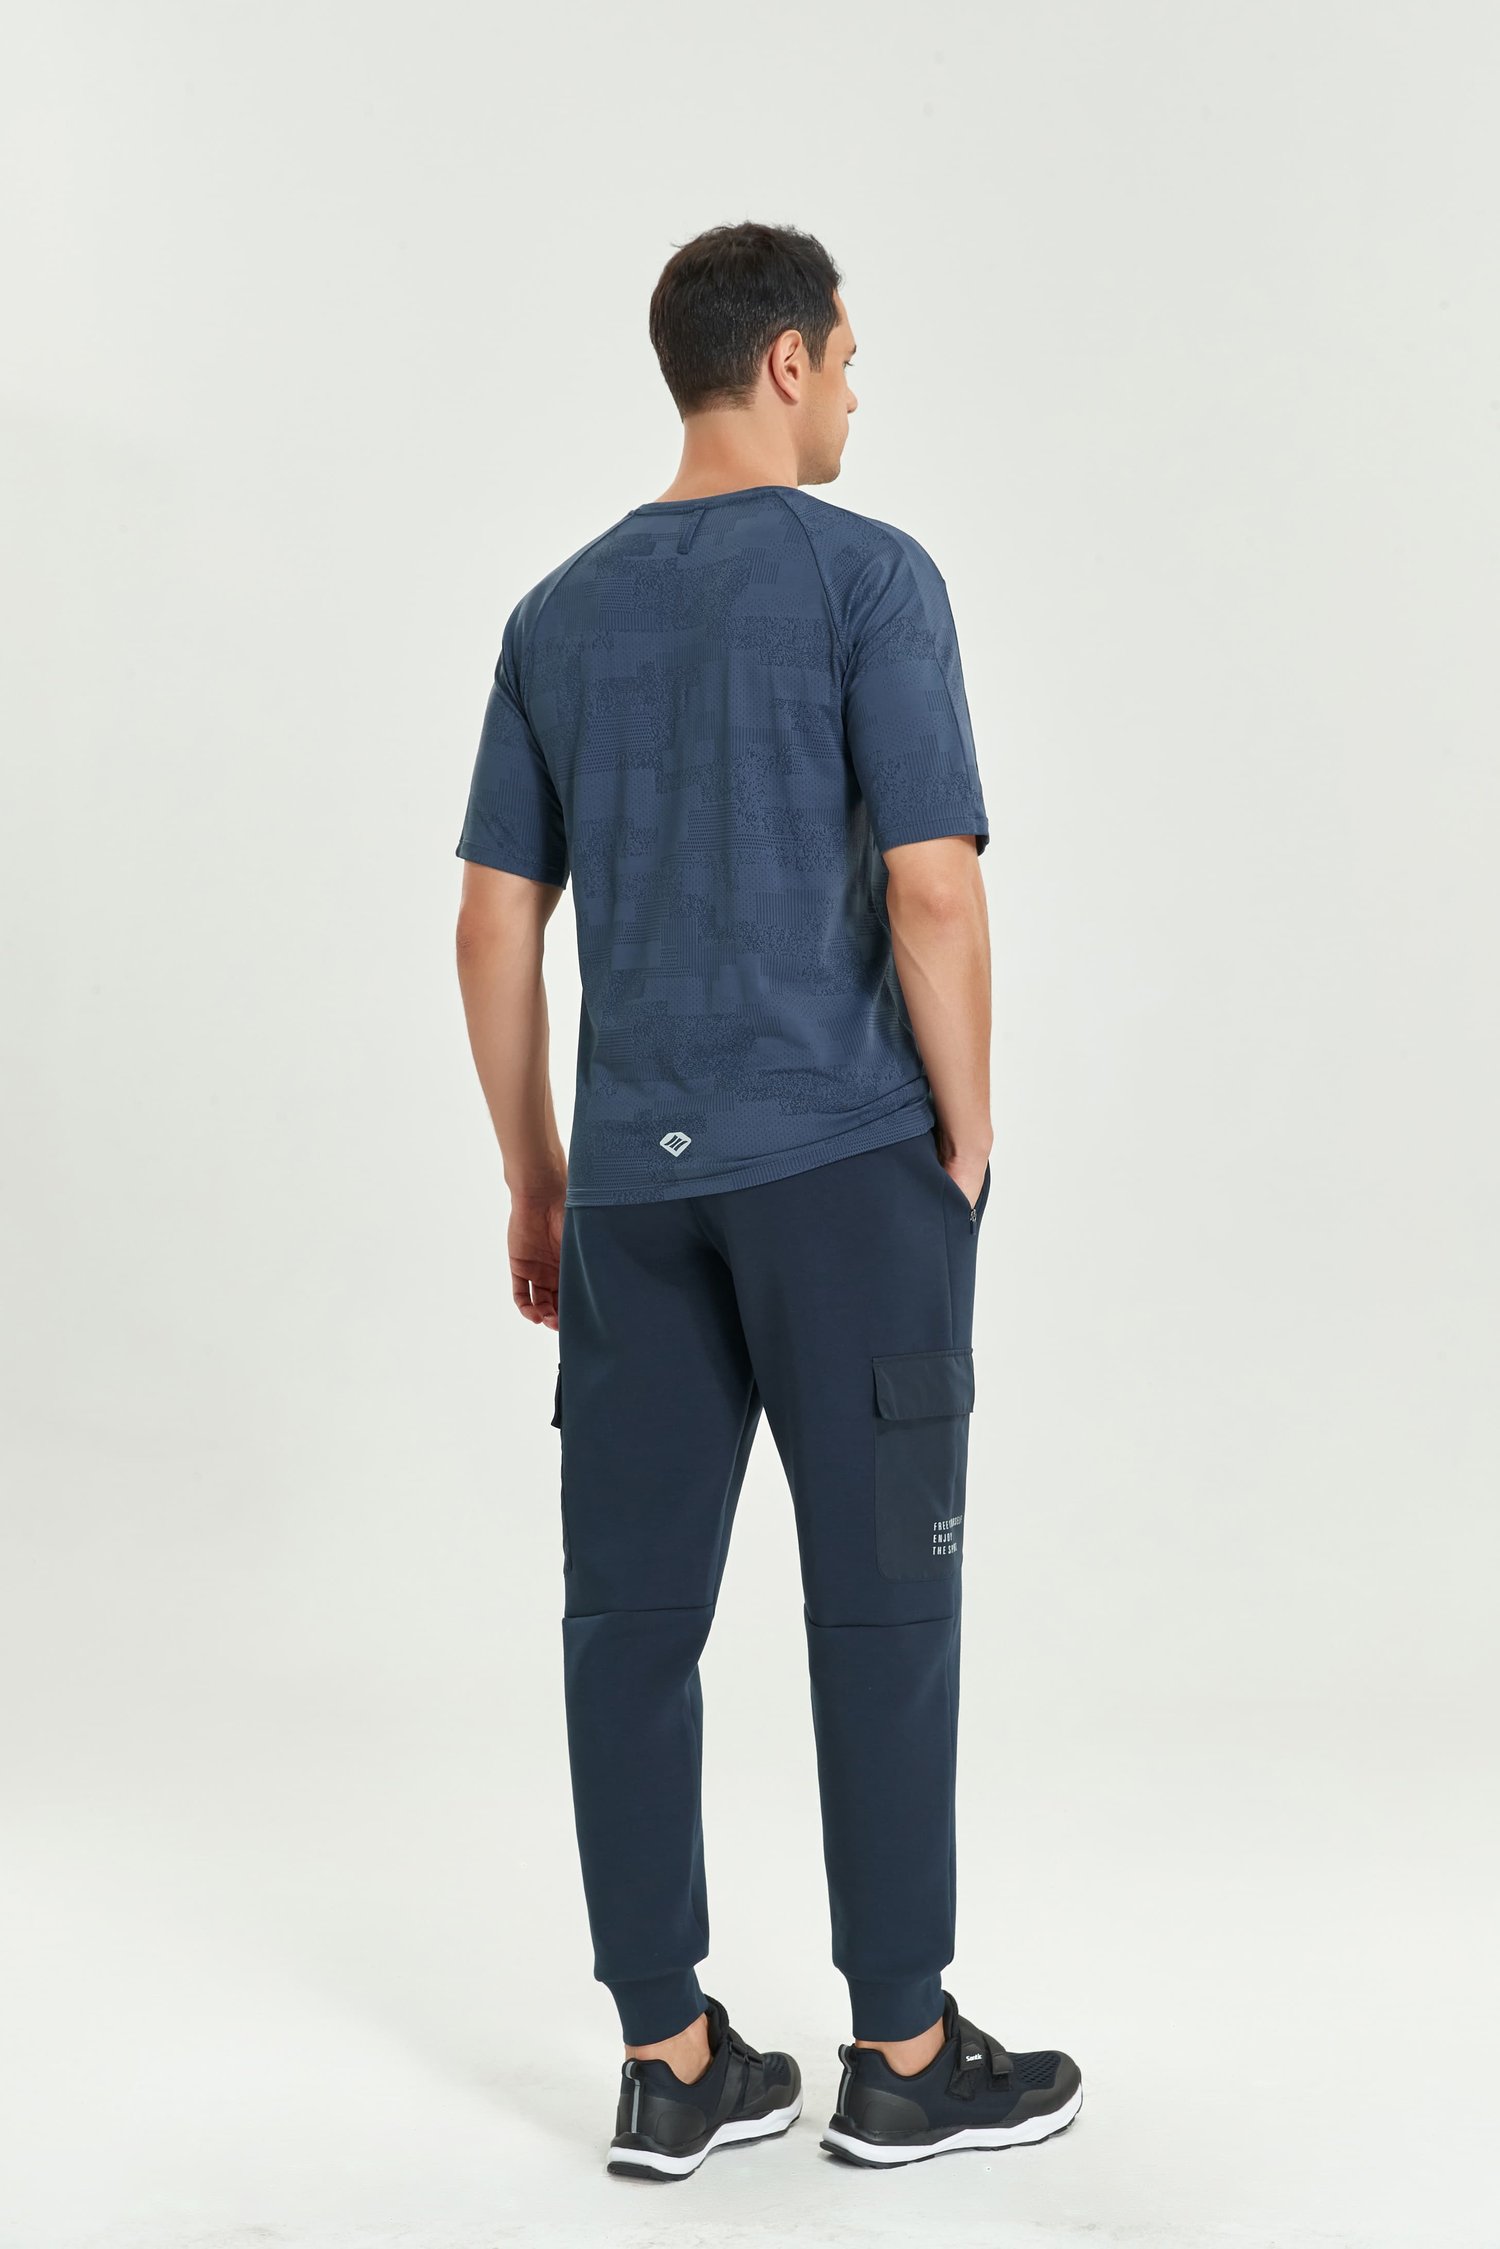 Men's Activewear Sets with Pants